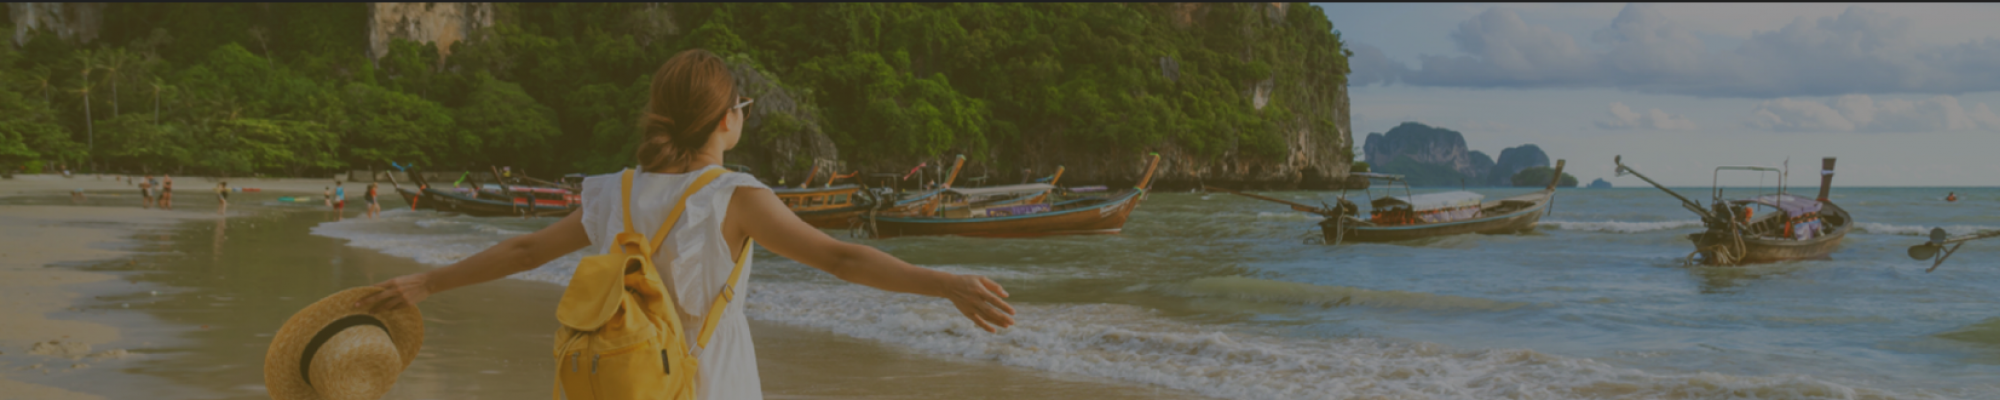 Image of woman on beach with boats in the background